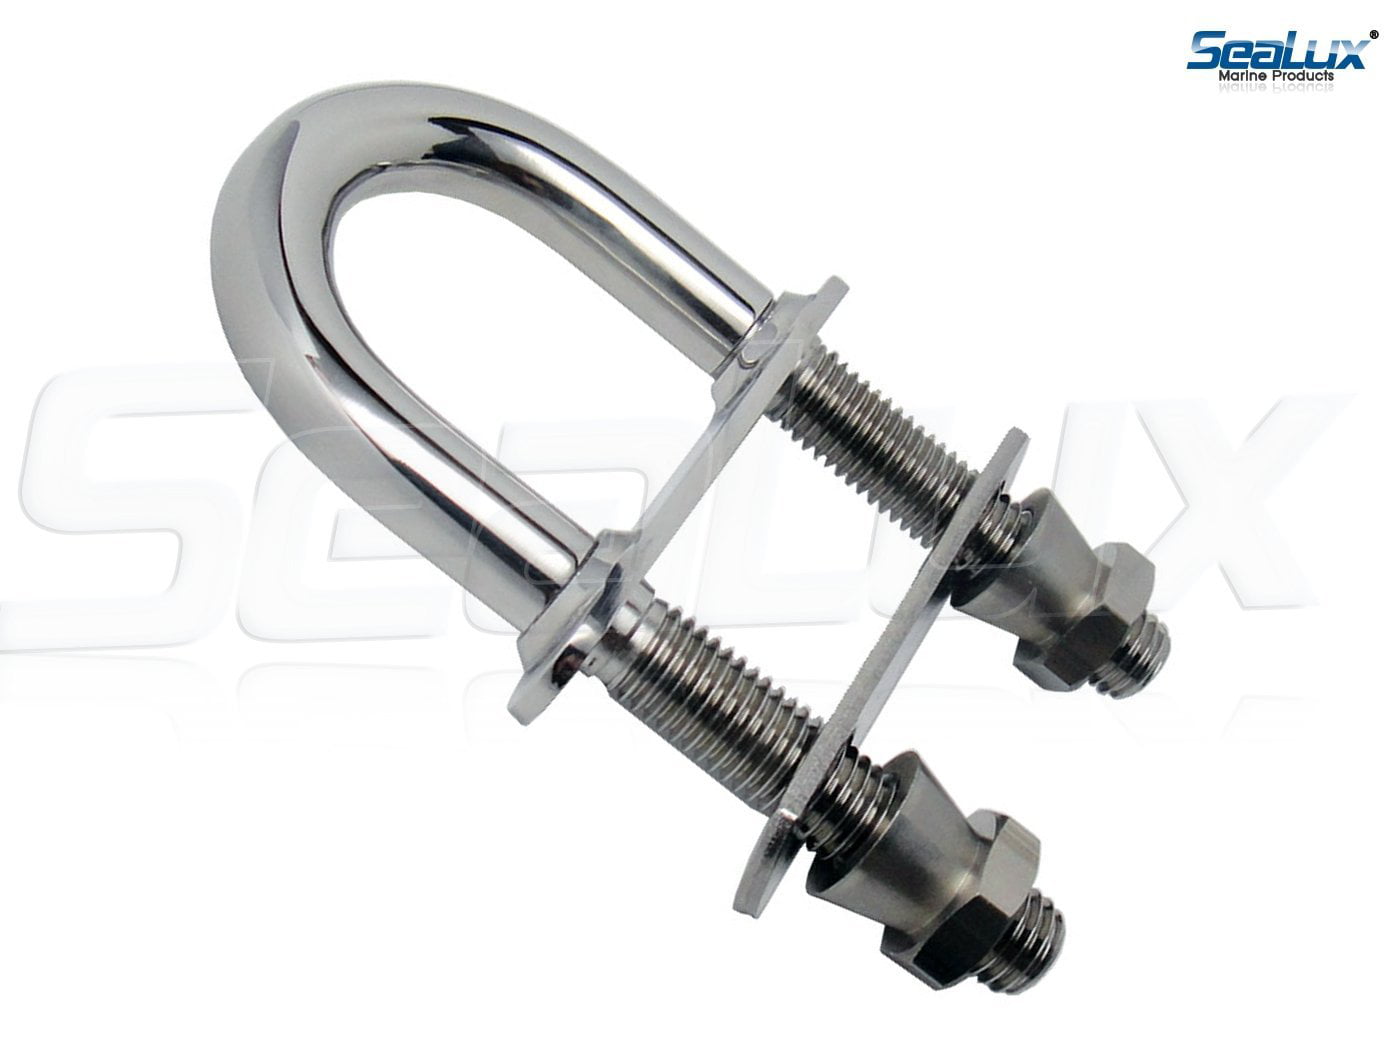 Stainless Steel 316 U-Bolt bow or transom eye MANY SIZES to pick from 